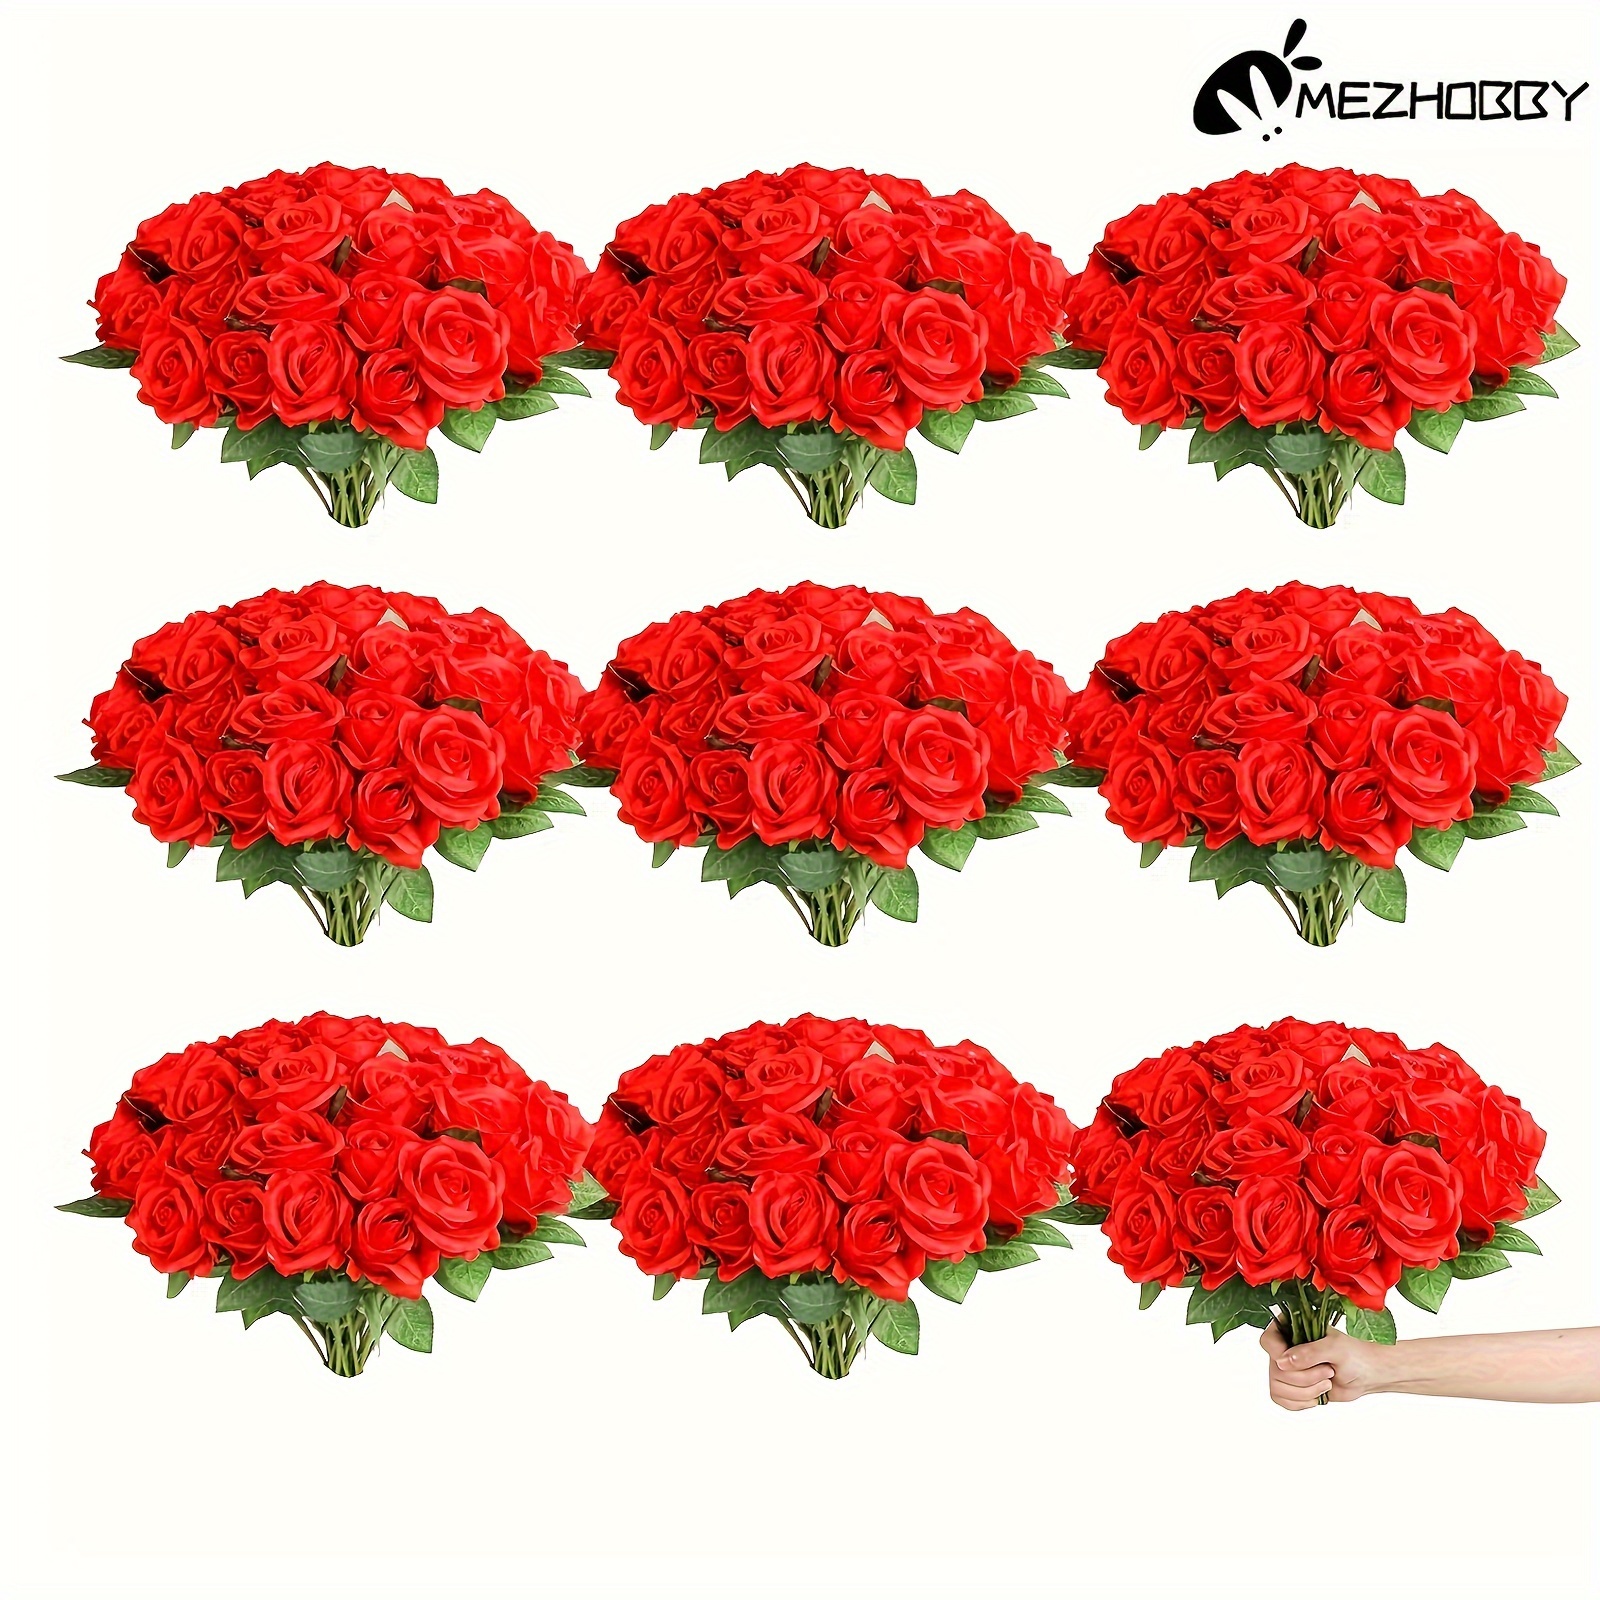 

120 Pcs Artificial Silk Rose Flowers, Fake Roses With Long Stems Artificial Flowers For Diy Wedding Bouquet Table Centerpiece Home Party Decor